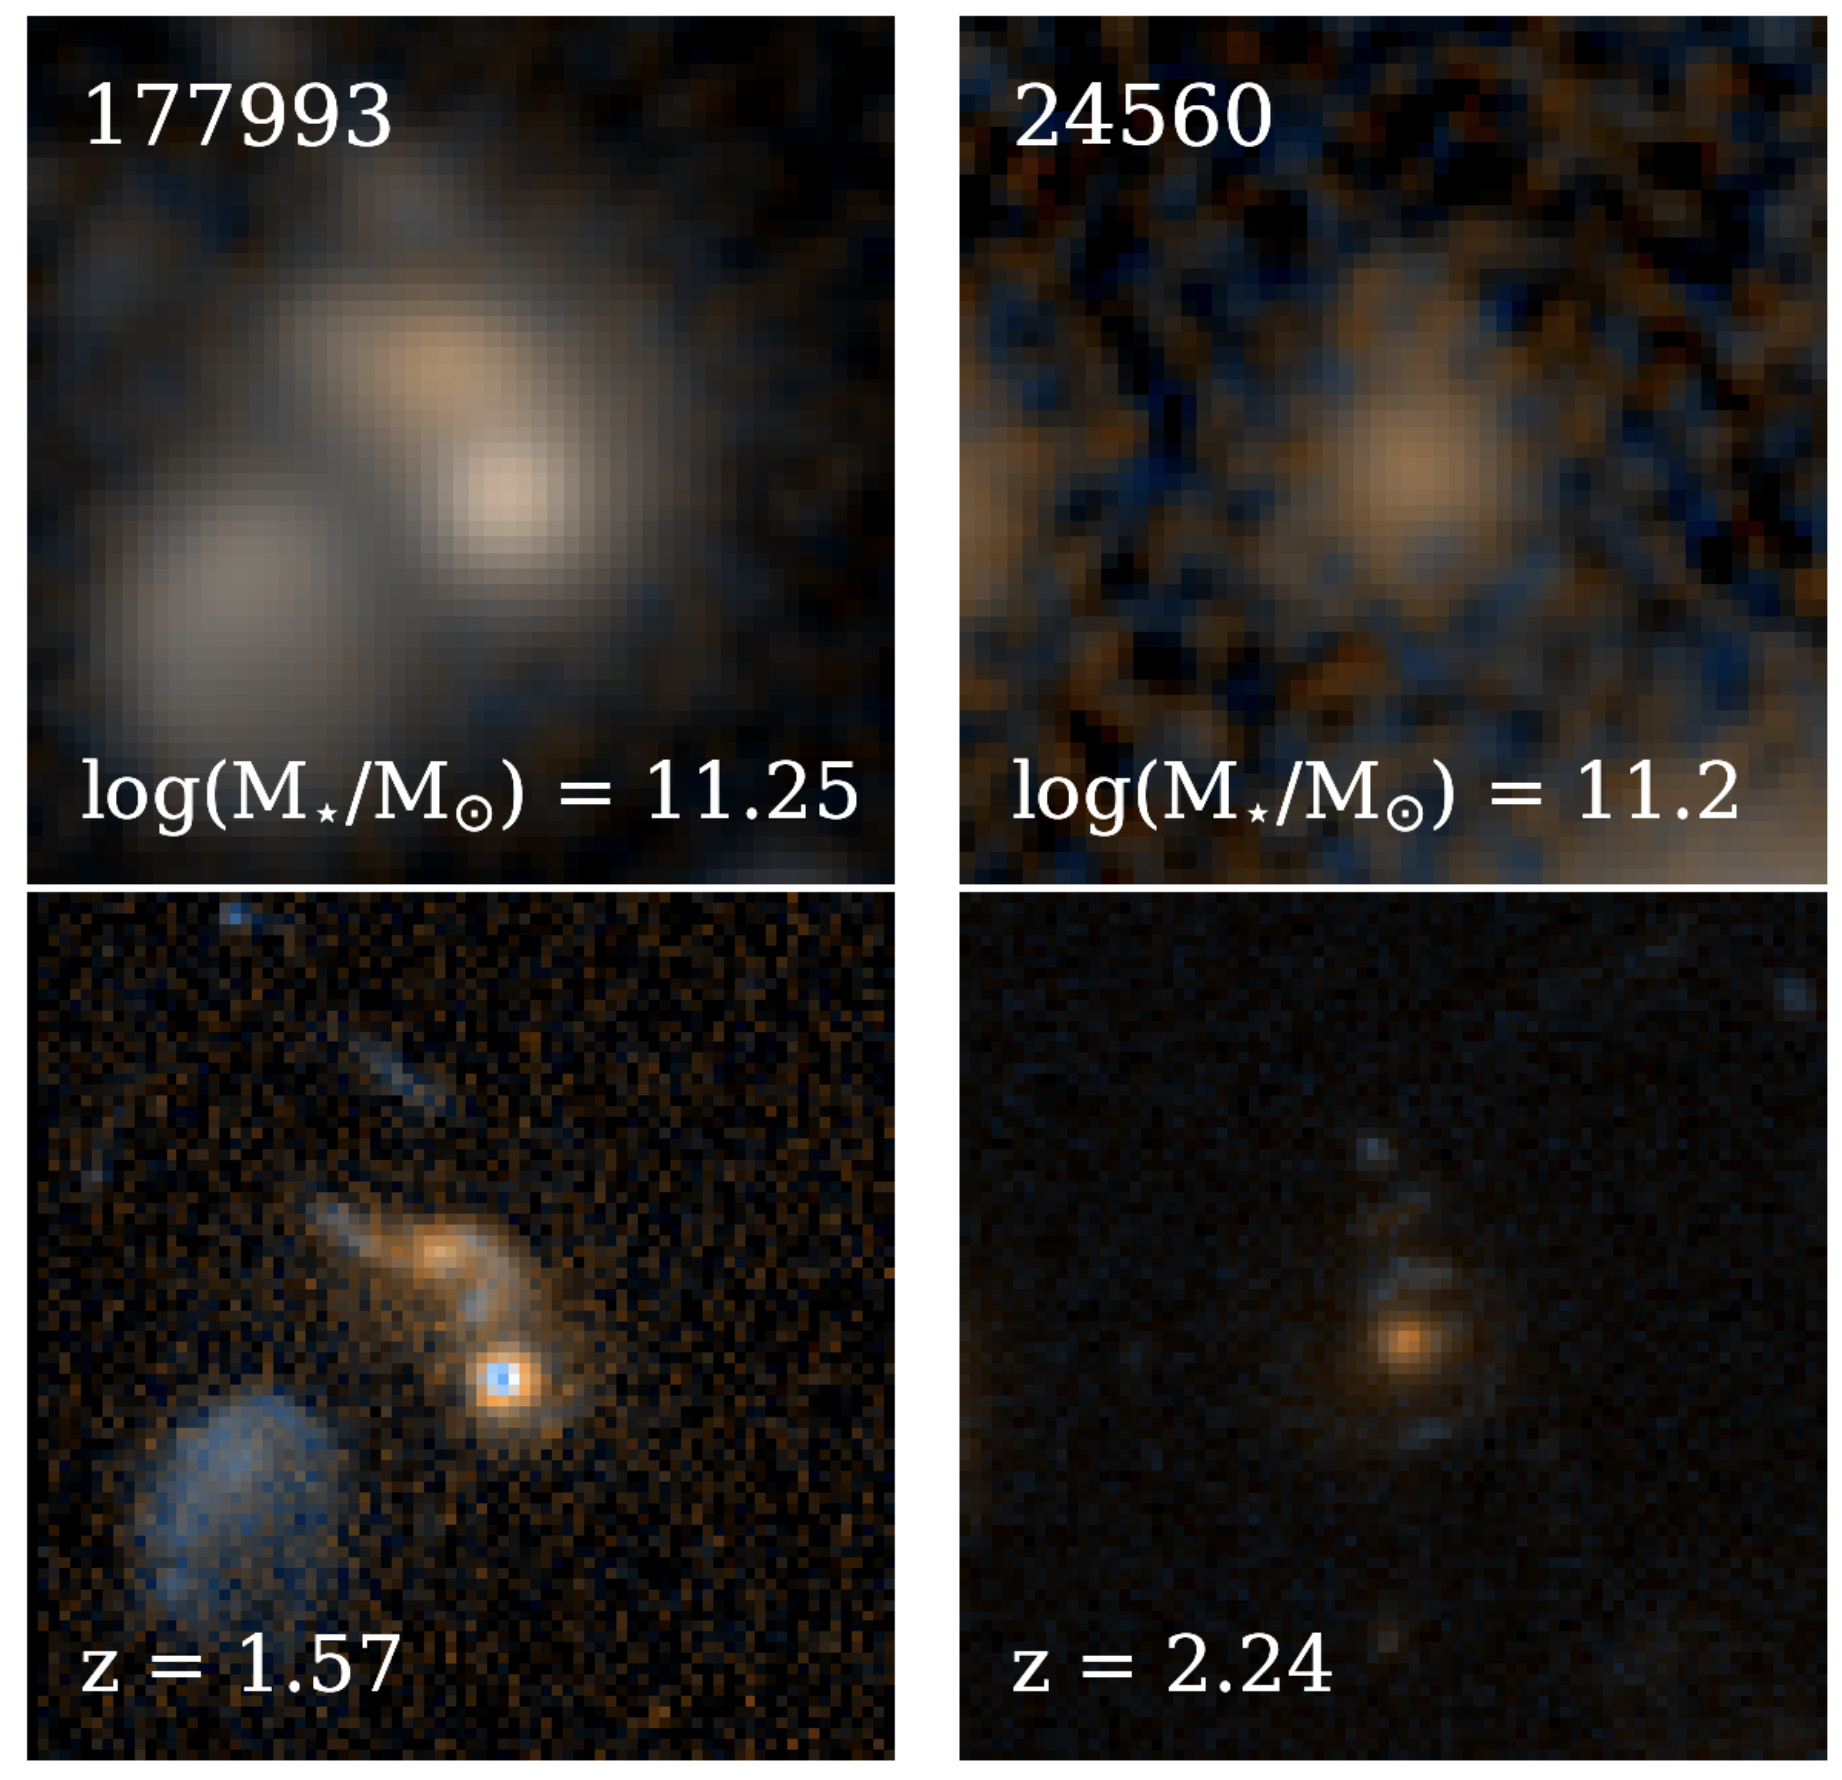 Low-resolution ground-based images and high-resolution COSMOS-DASH images of the same galaxies.